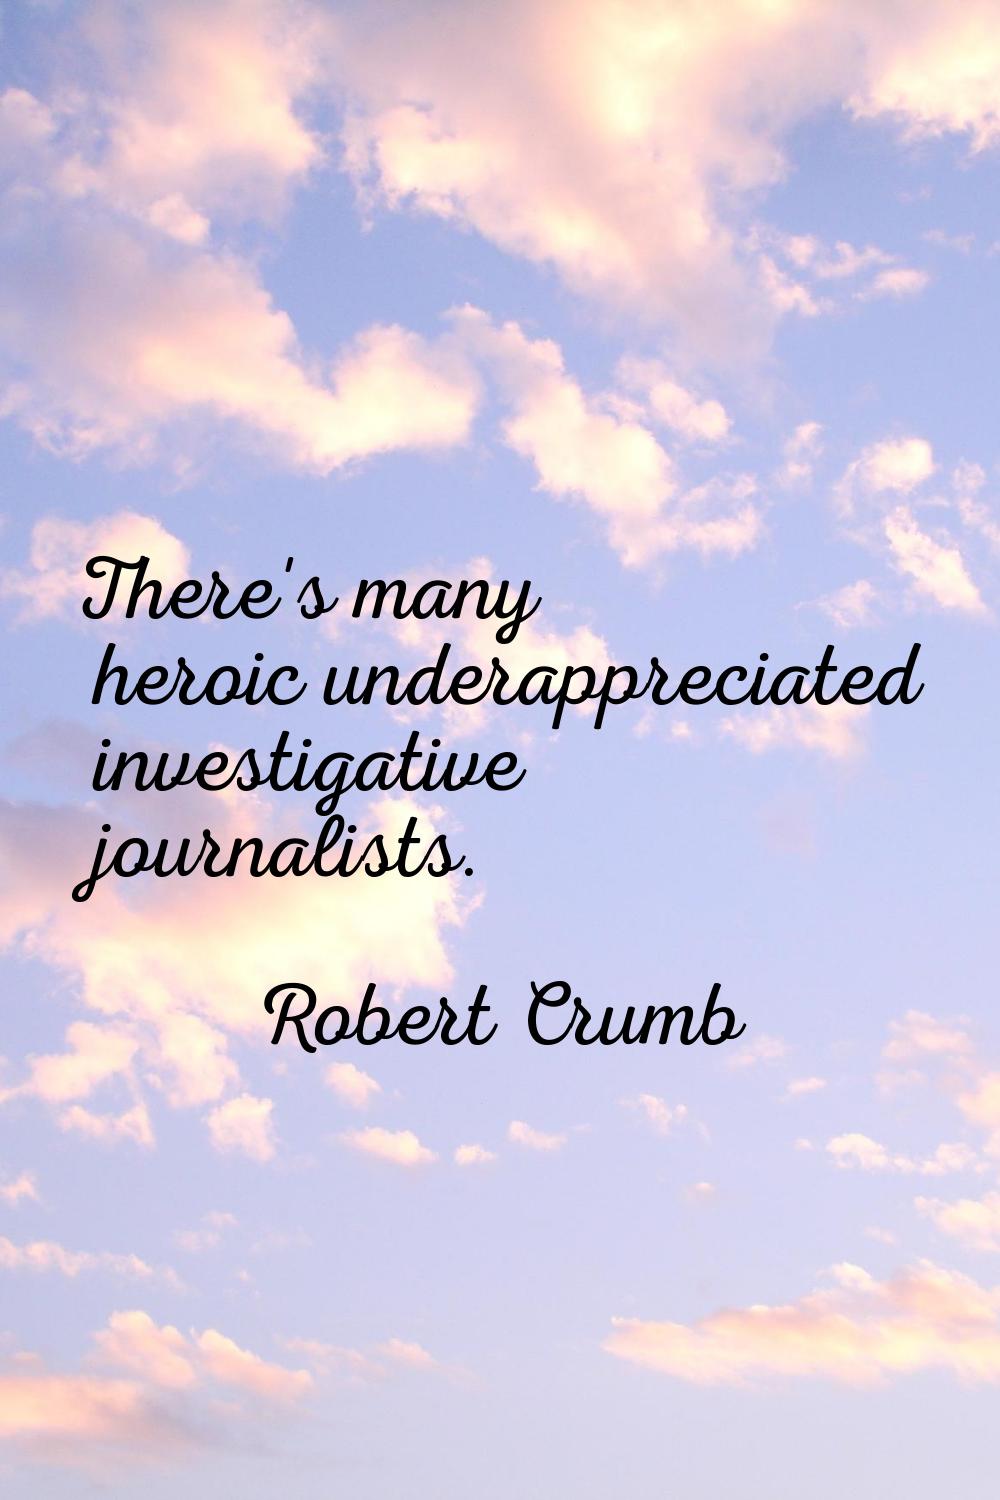 There's many heroic underappreciated investigative journalists.